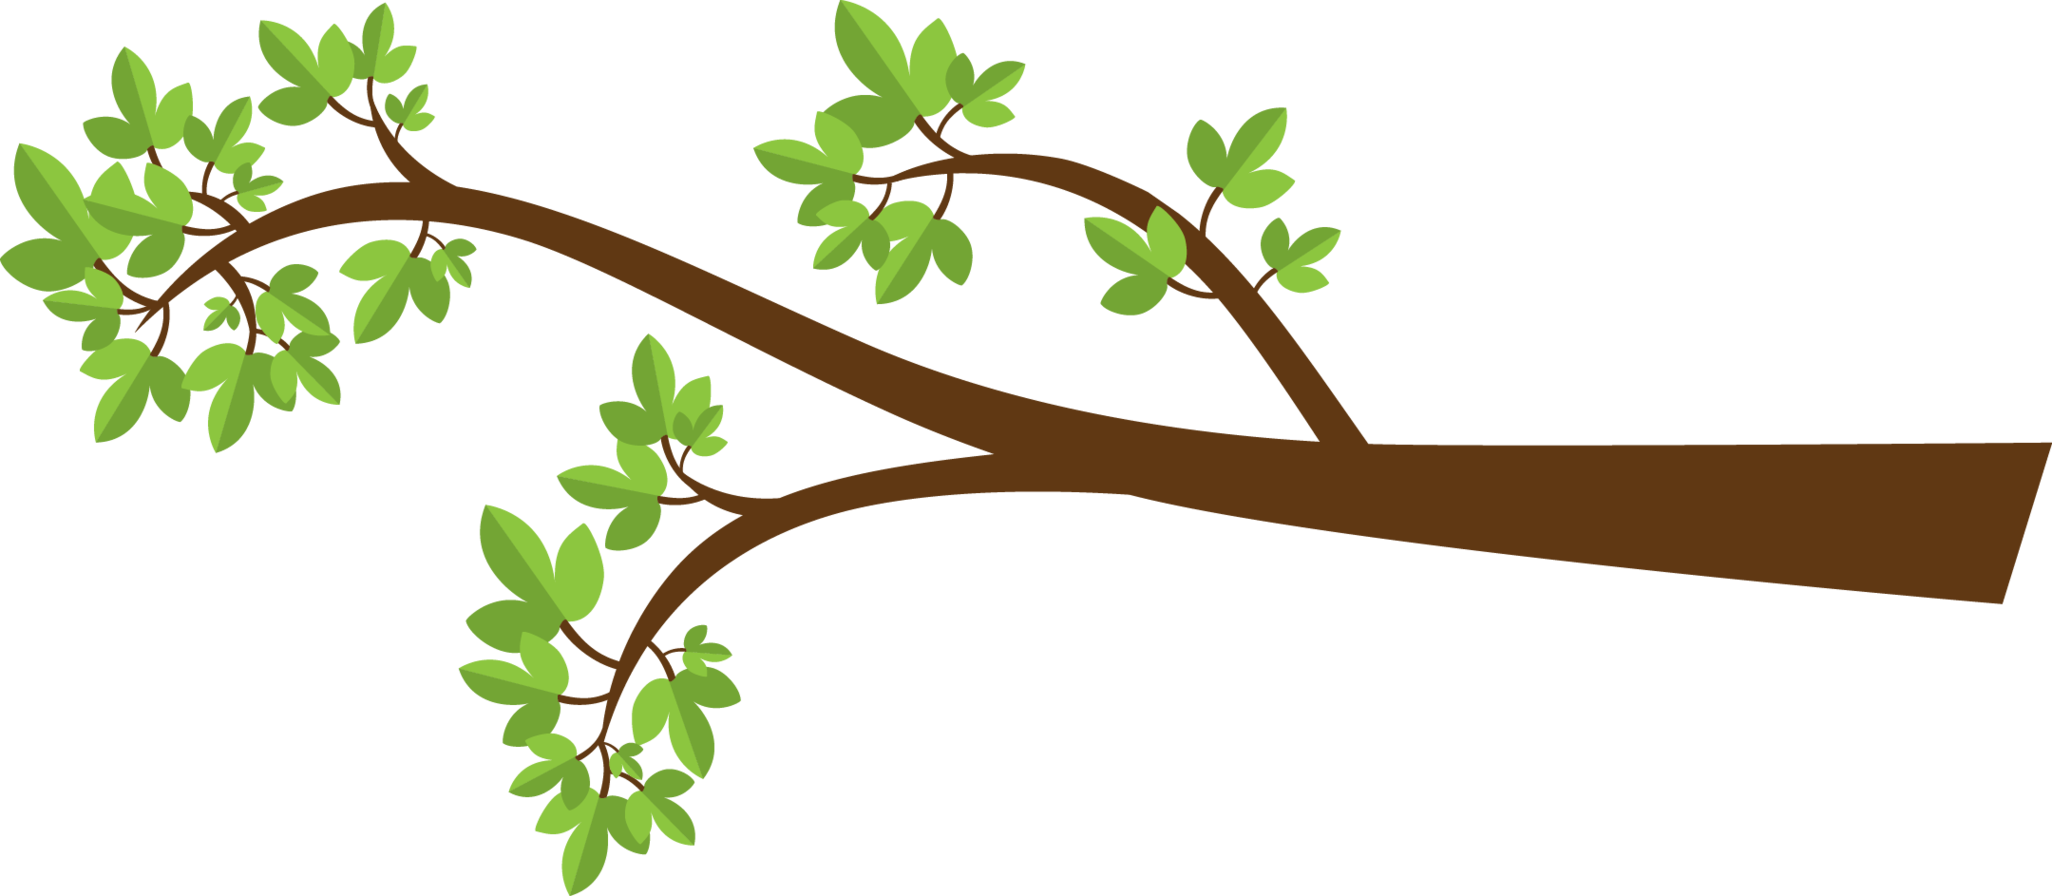 Tree Branch Clipart & Tree Branch Clip Art Images.